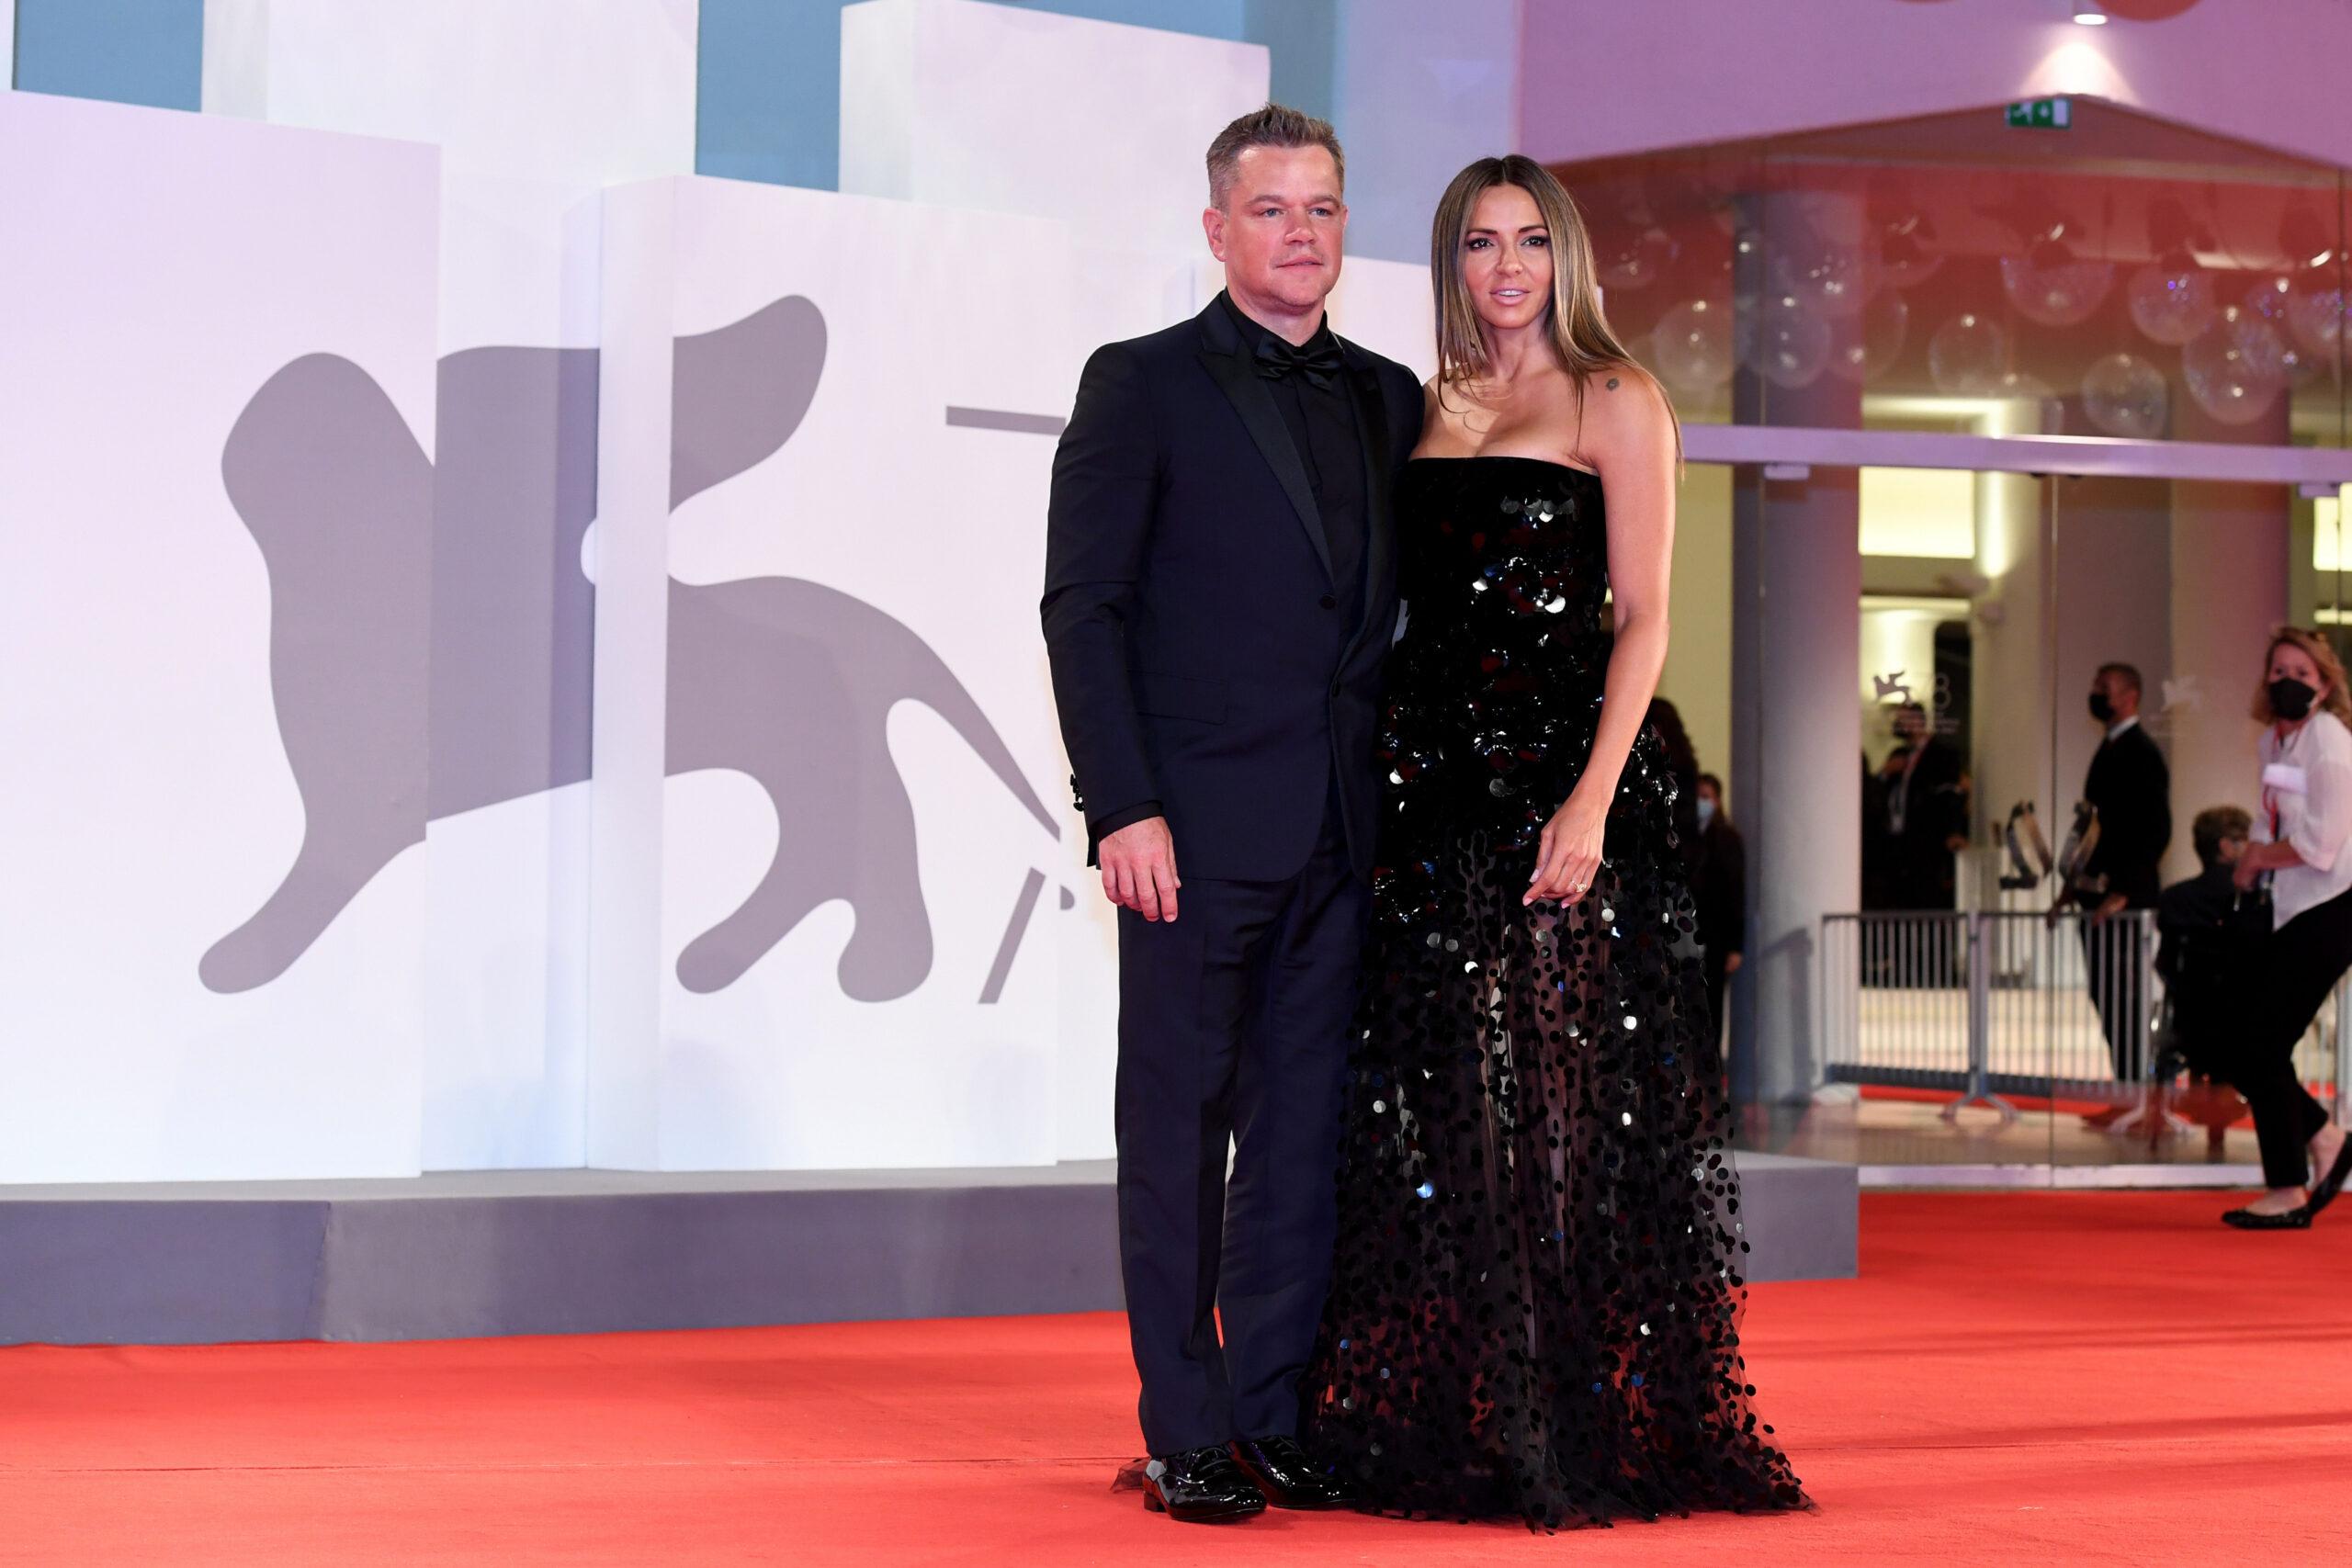 Jennifer Lopez Ben Affleck Nicole Holofcener Director Ridley Scott Jodie Comer and Matt Damon attend the red carpet of the movie quot The Last Duel quot during the 78th Venice International Film Festival